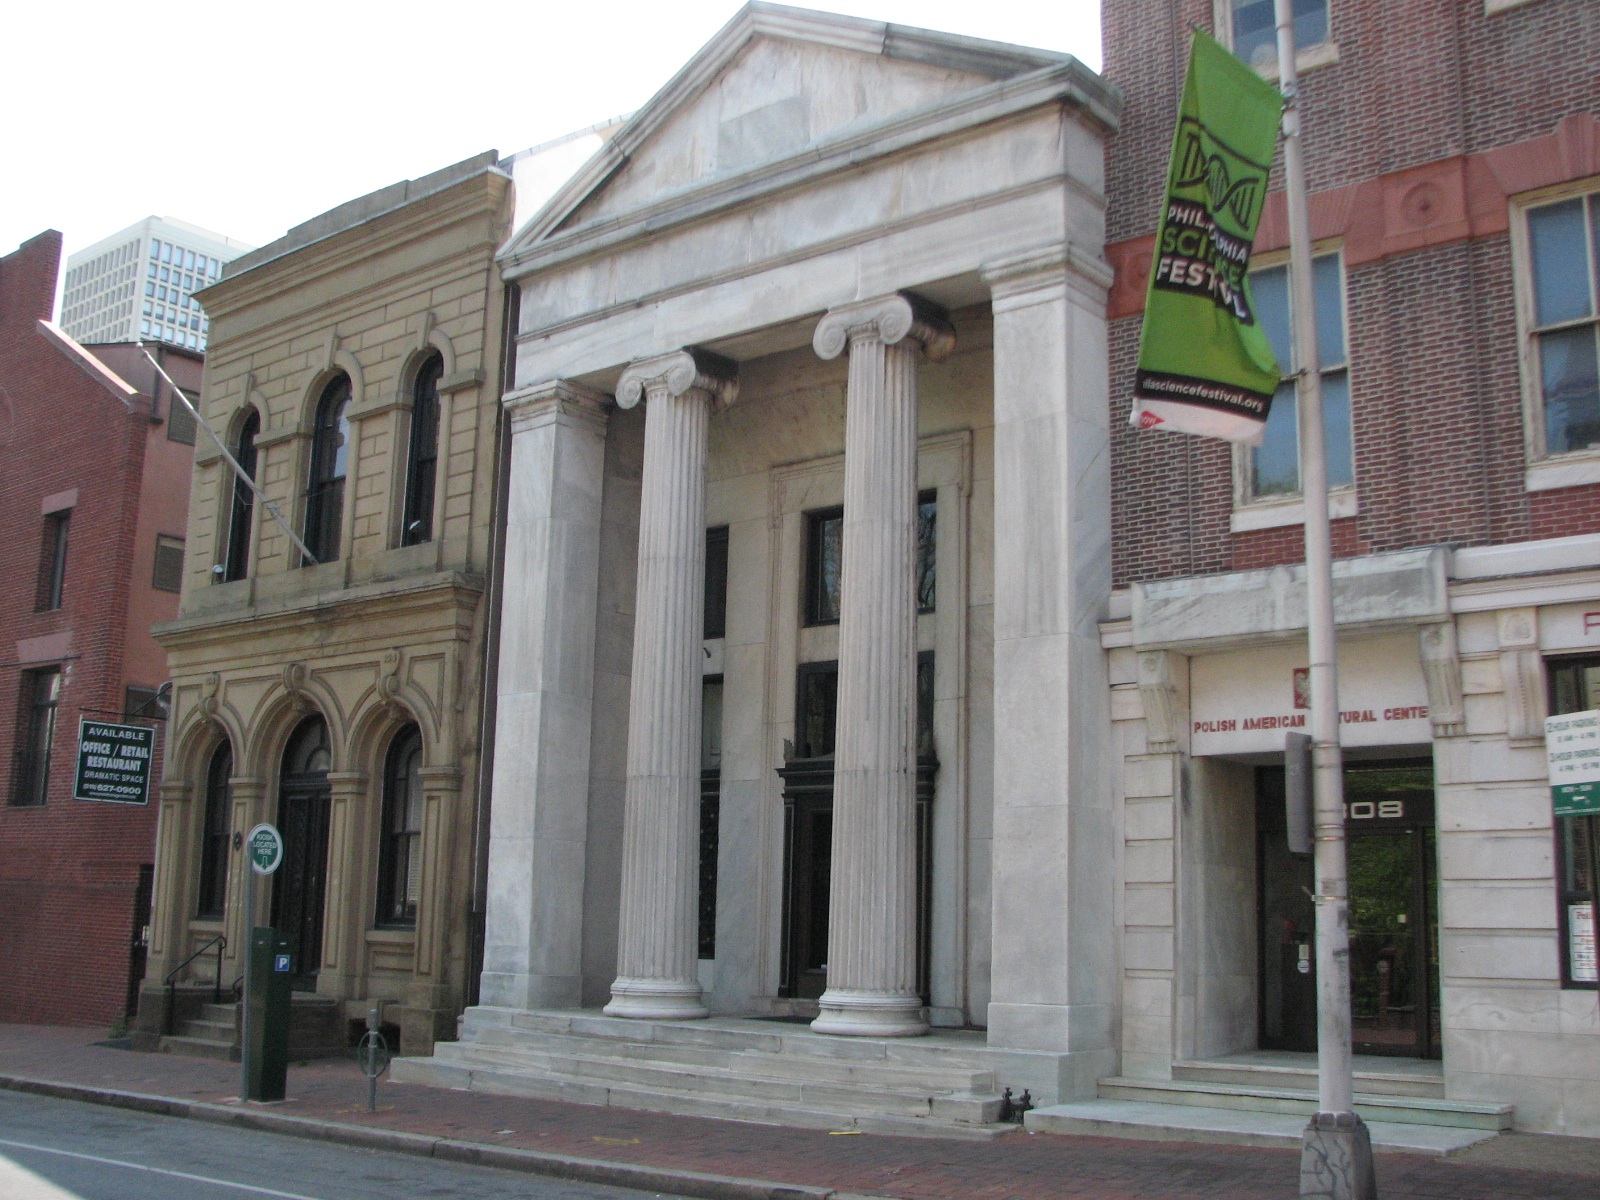 The building at 306 Walnut was the first headquarters of PSFS.